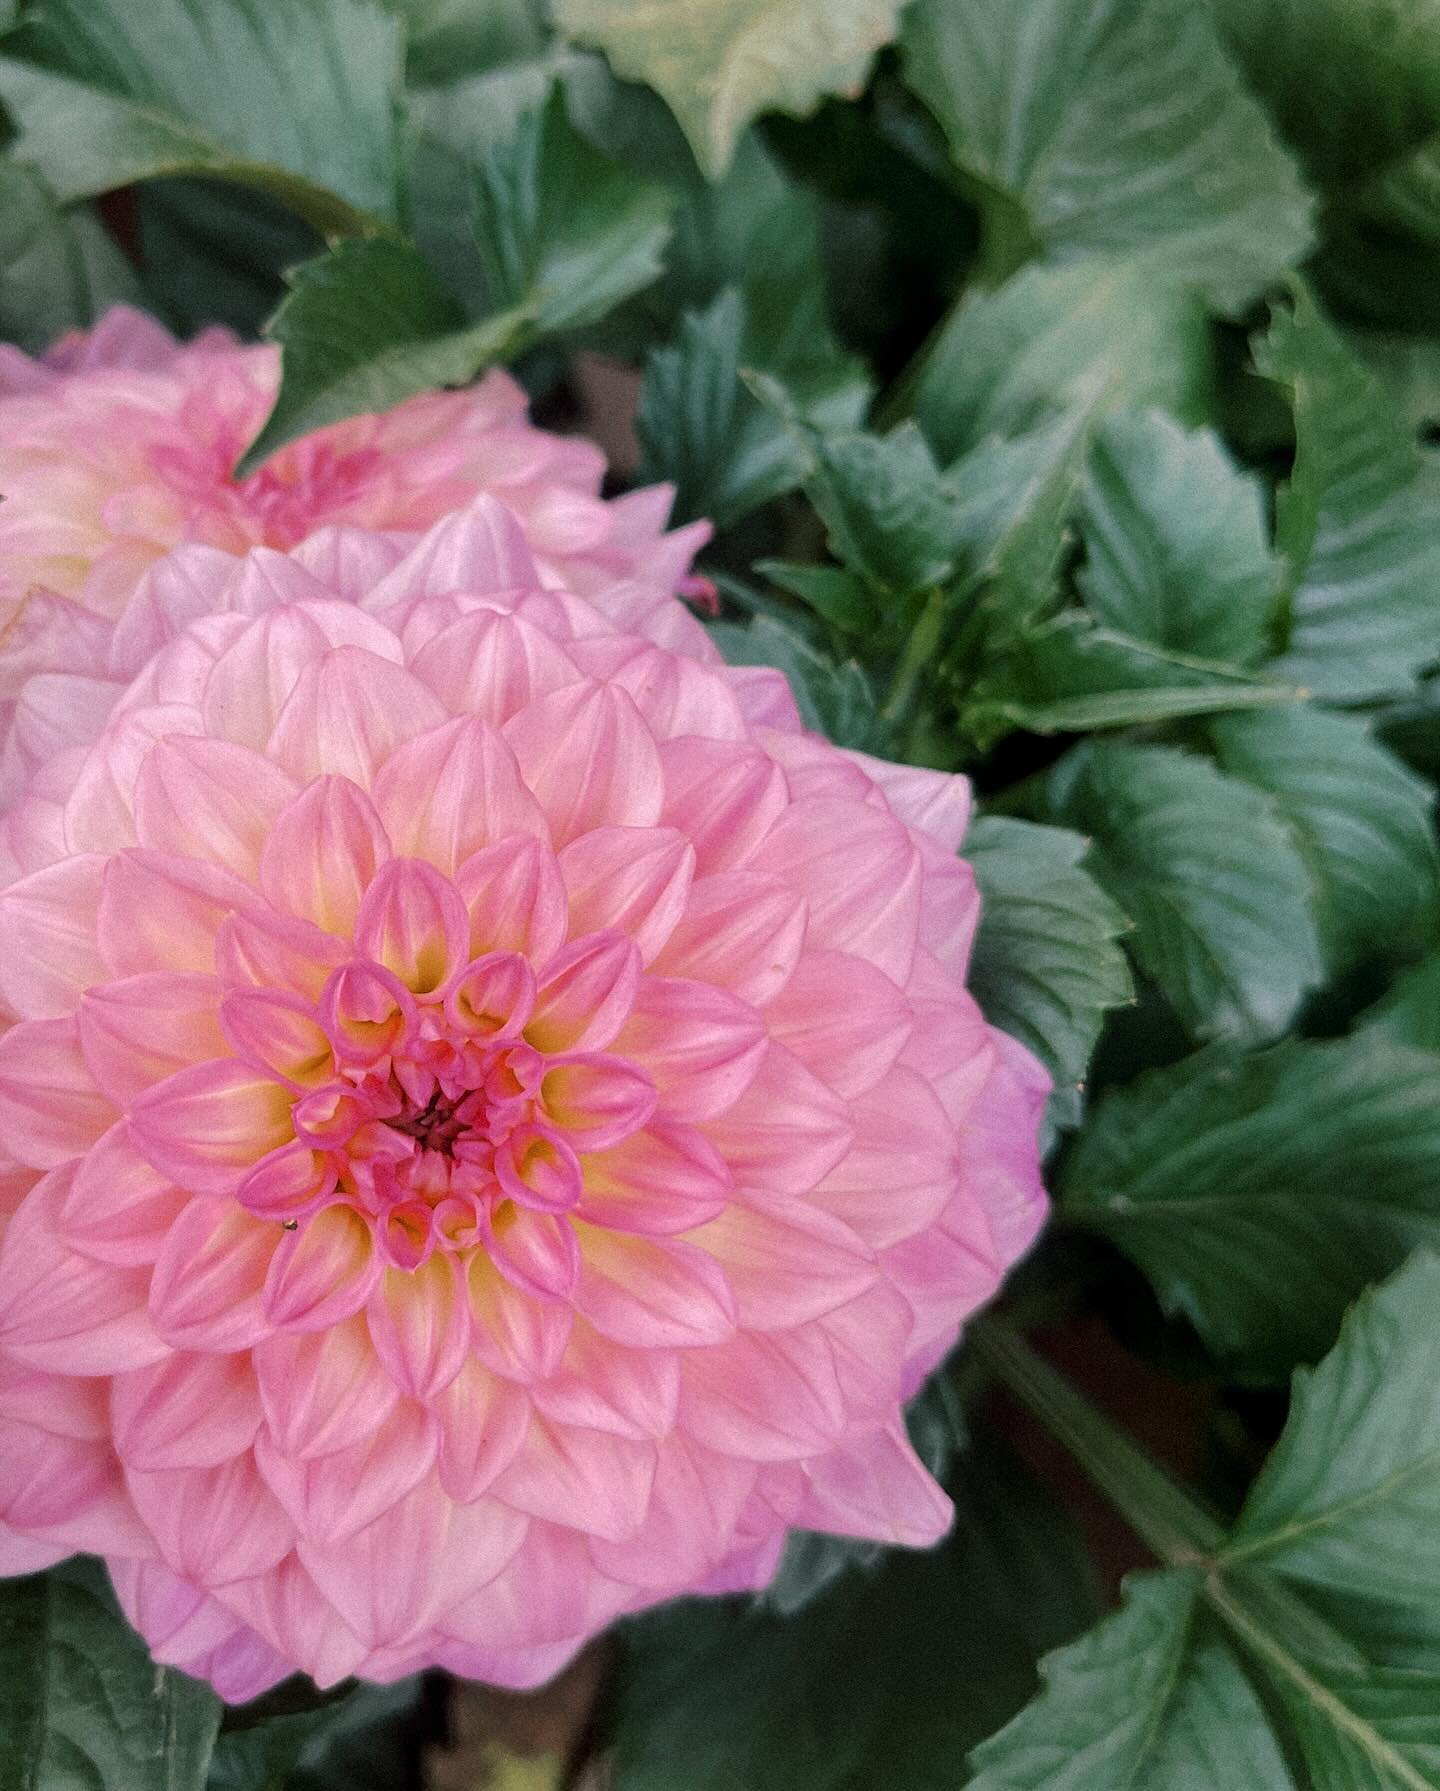 Just getting around to sharing our first cut flowers of the season which began blooming in early March! This year we&rsquo;re growing several varieties of dahlias along with a few dozen other cut flowers and I couldn&rsquo;t be happier!! These beauti